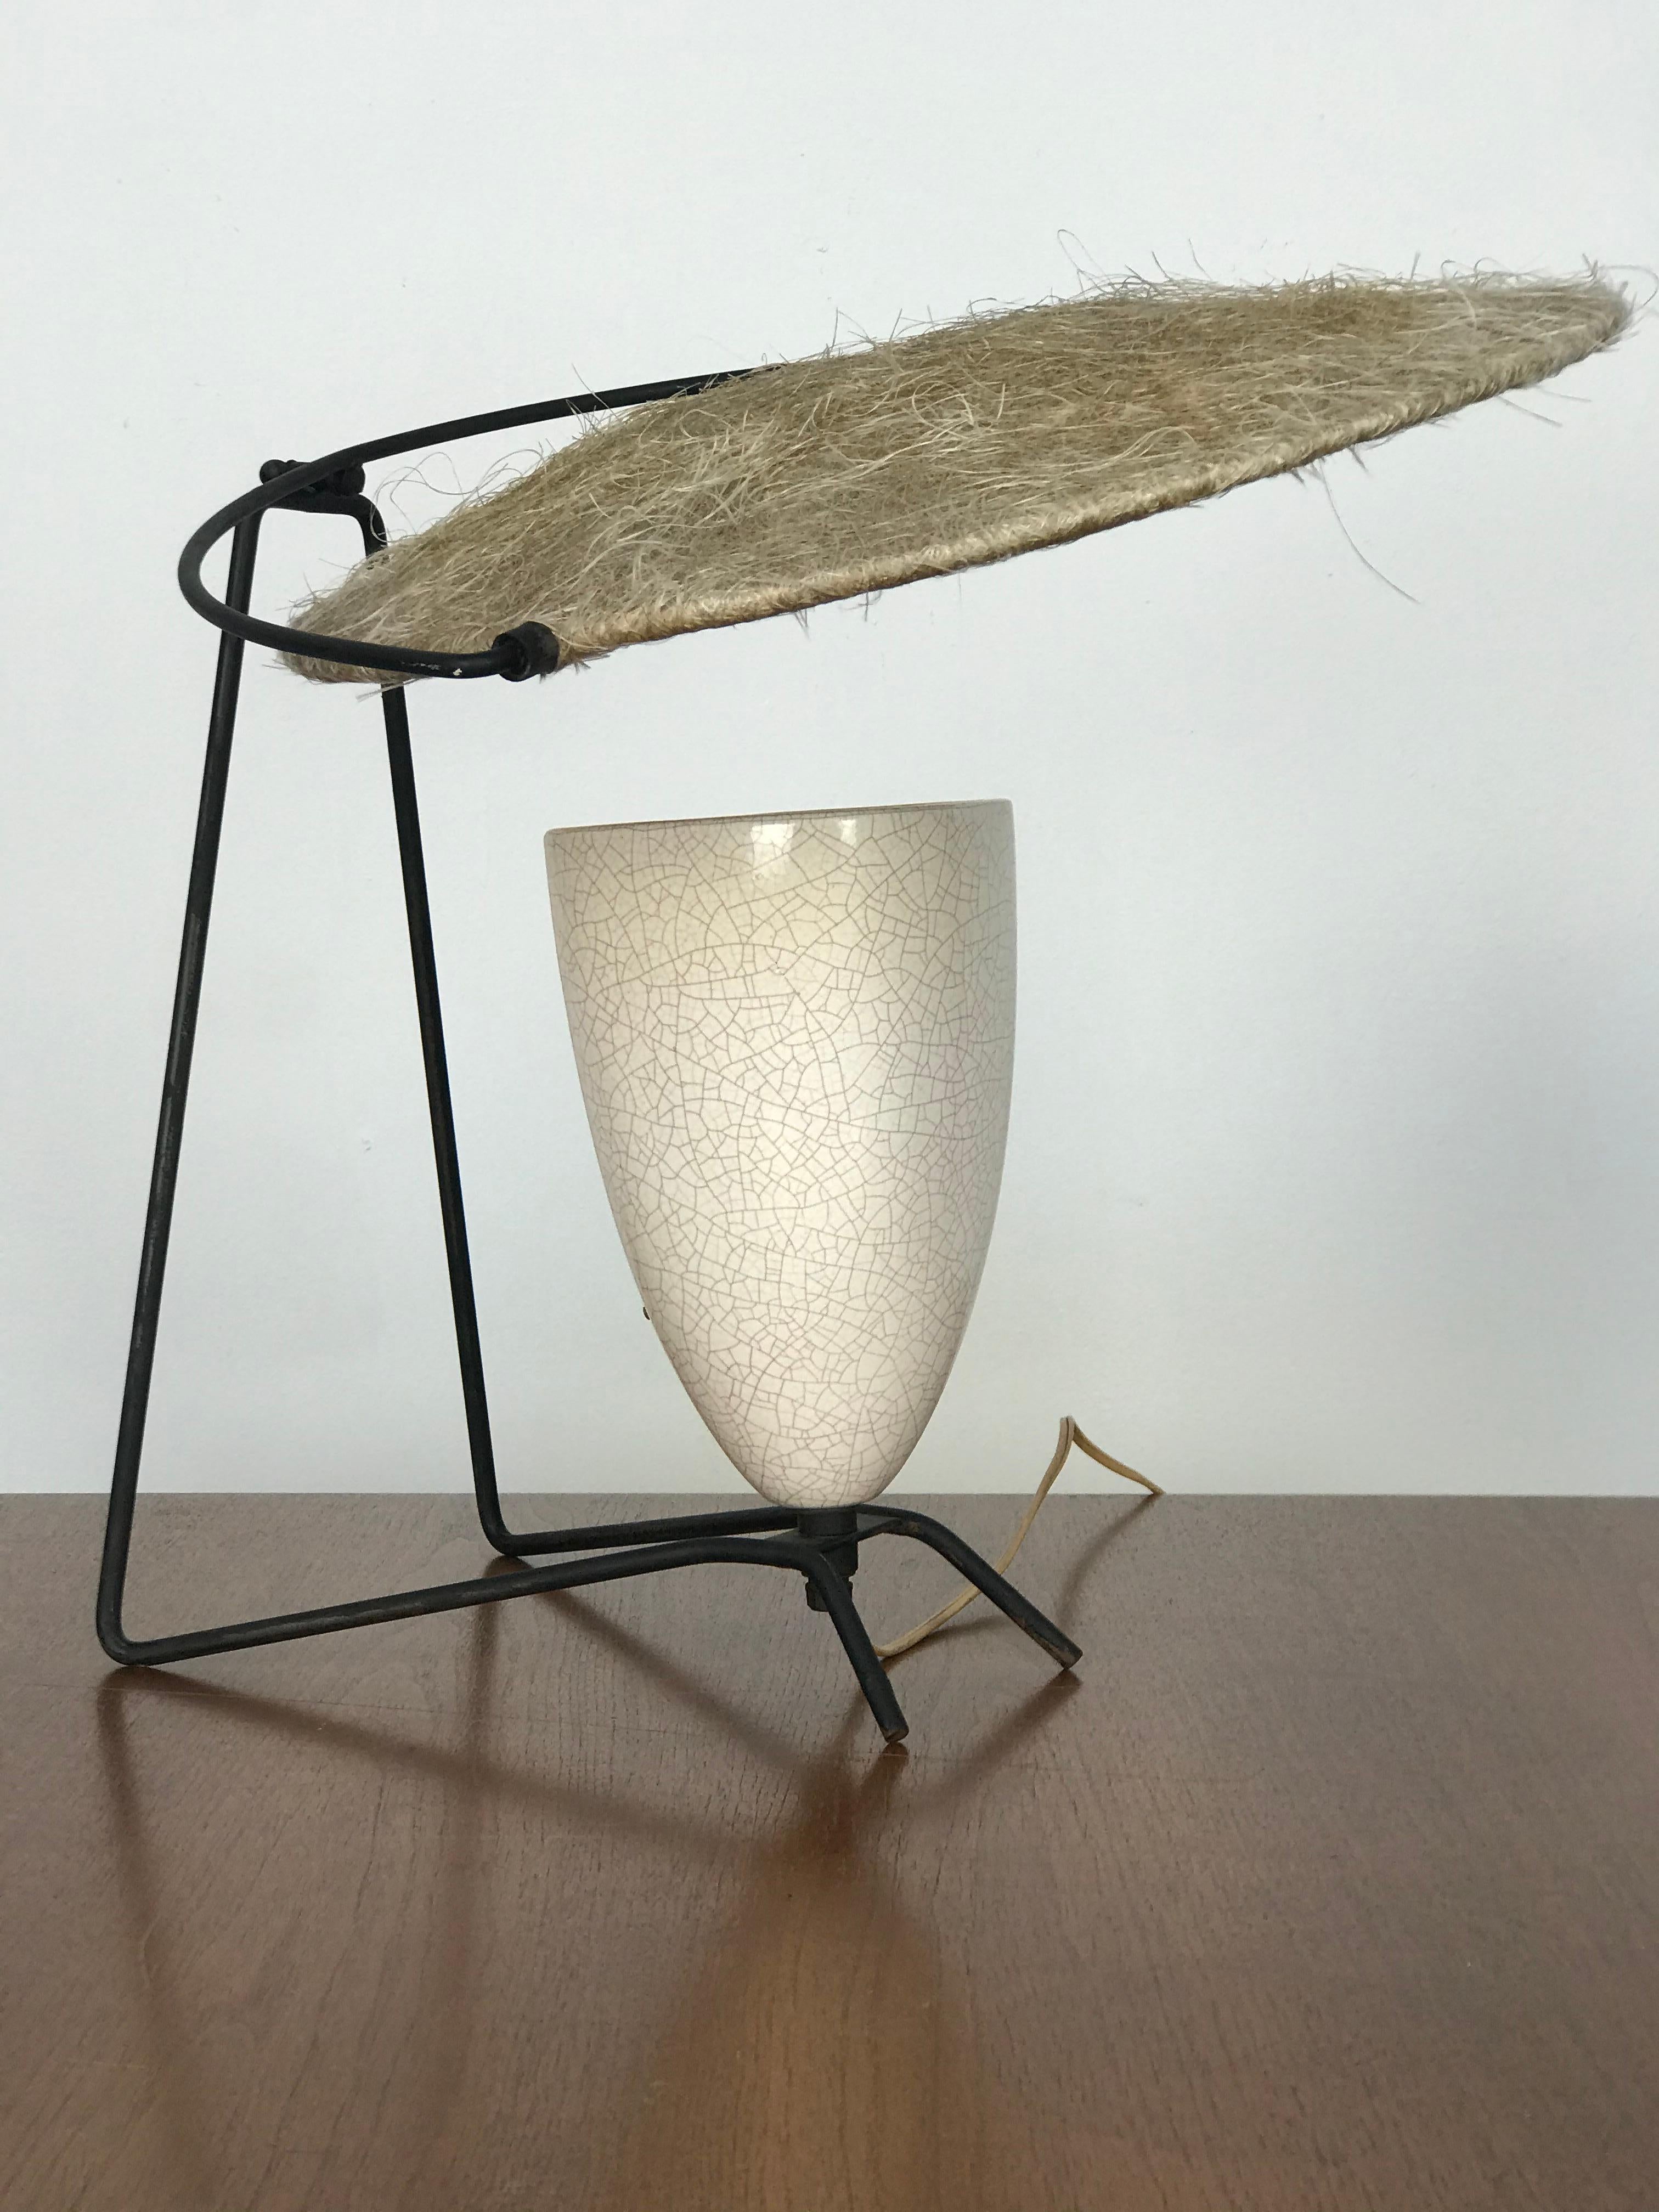 Rare early model desk/table lamp by Mitchell Bobrick for Controlight. Designed in 1945. The Bobrick lamps with these early iron legs and book-rests are hard to find. A book can be rested against the iron base. This one is in very nice original